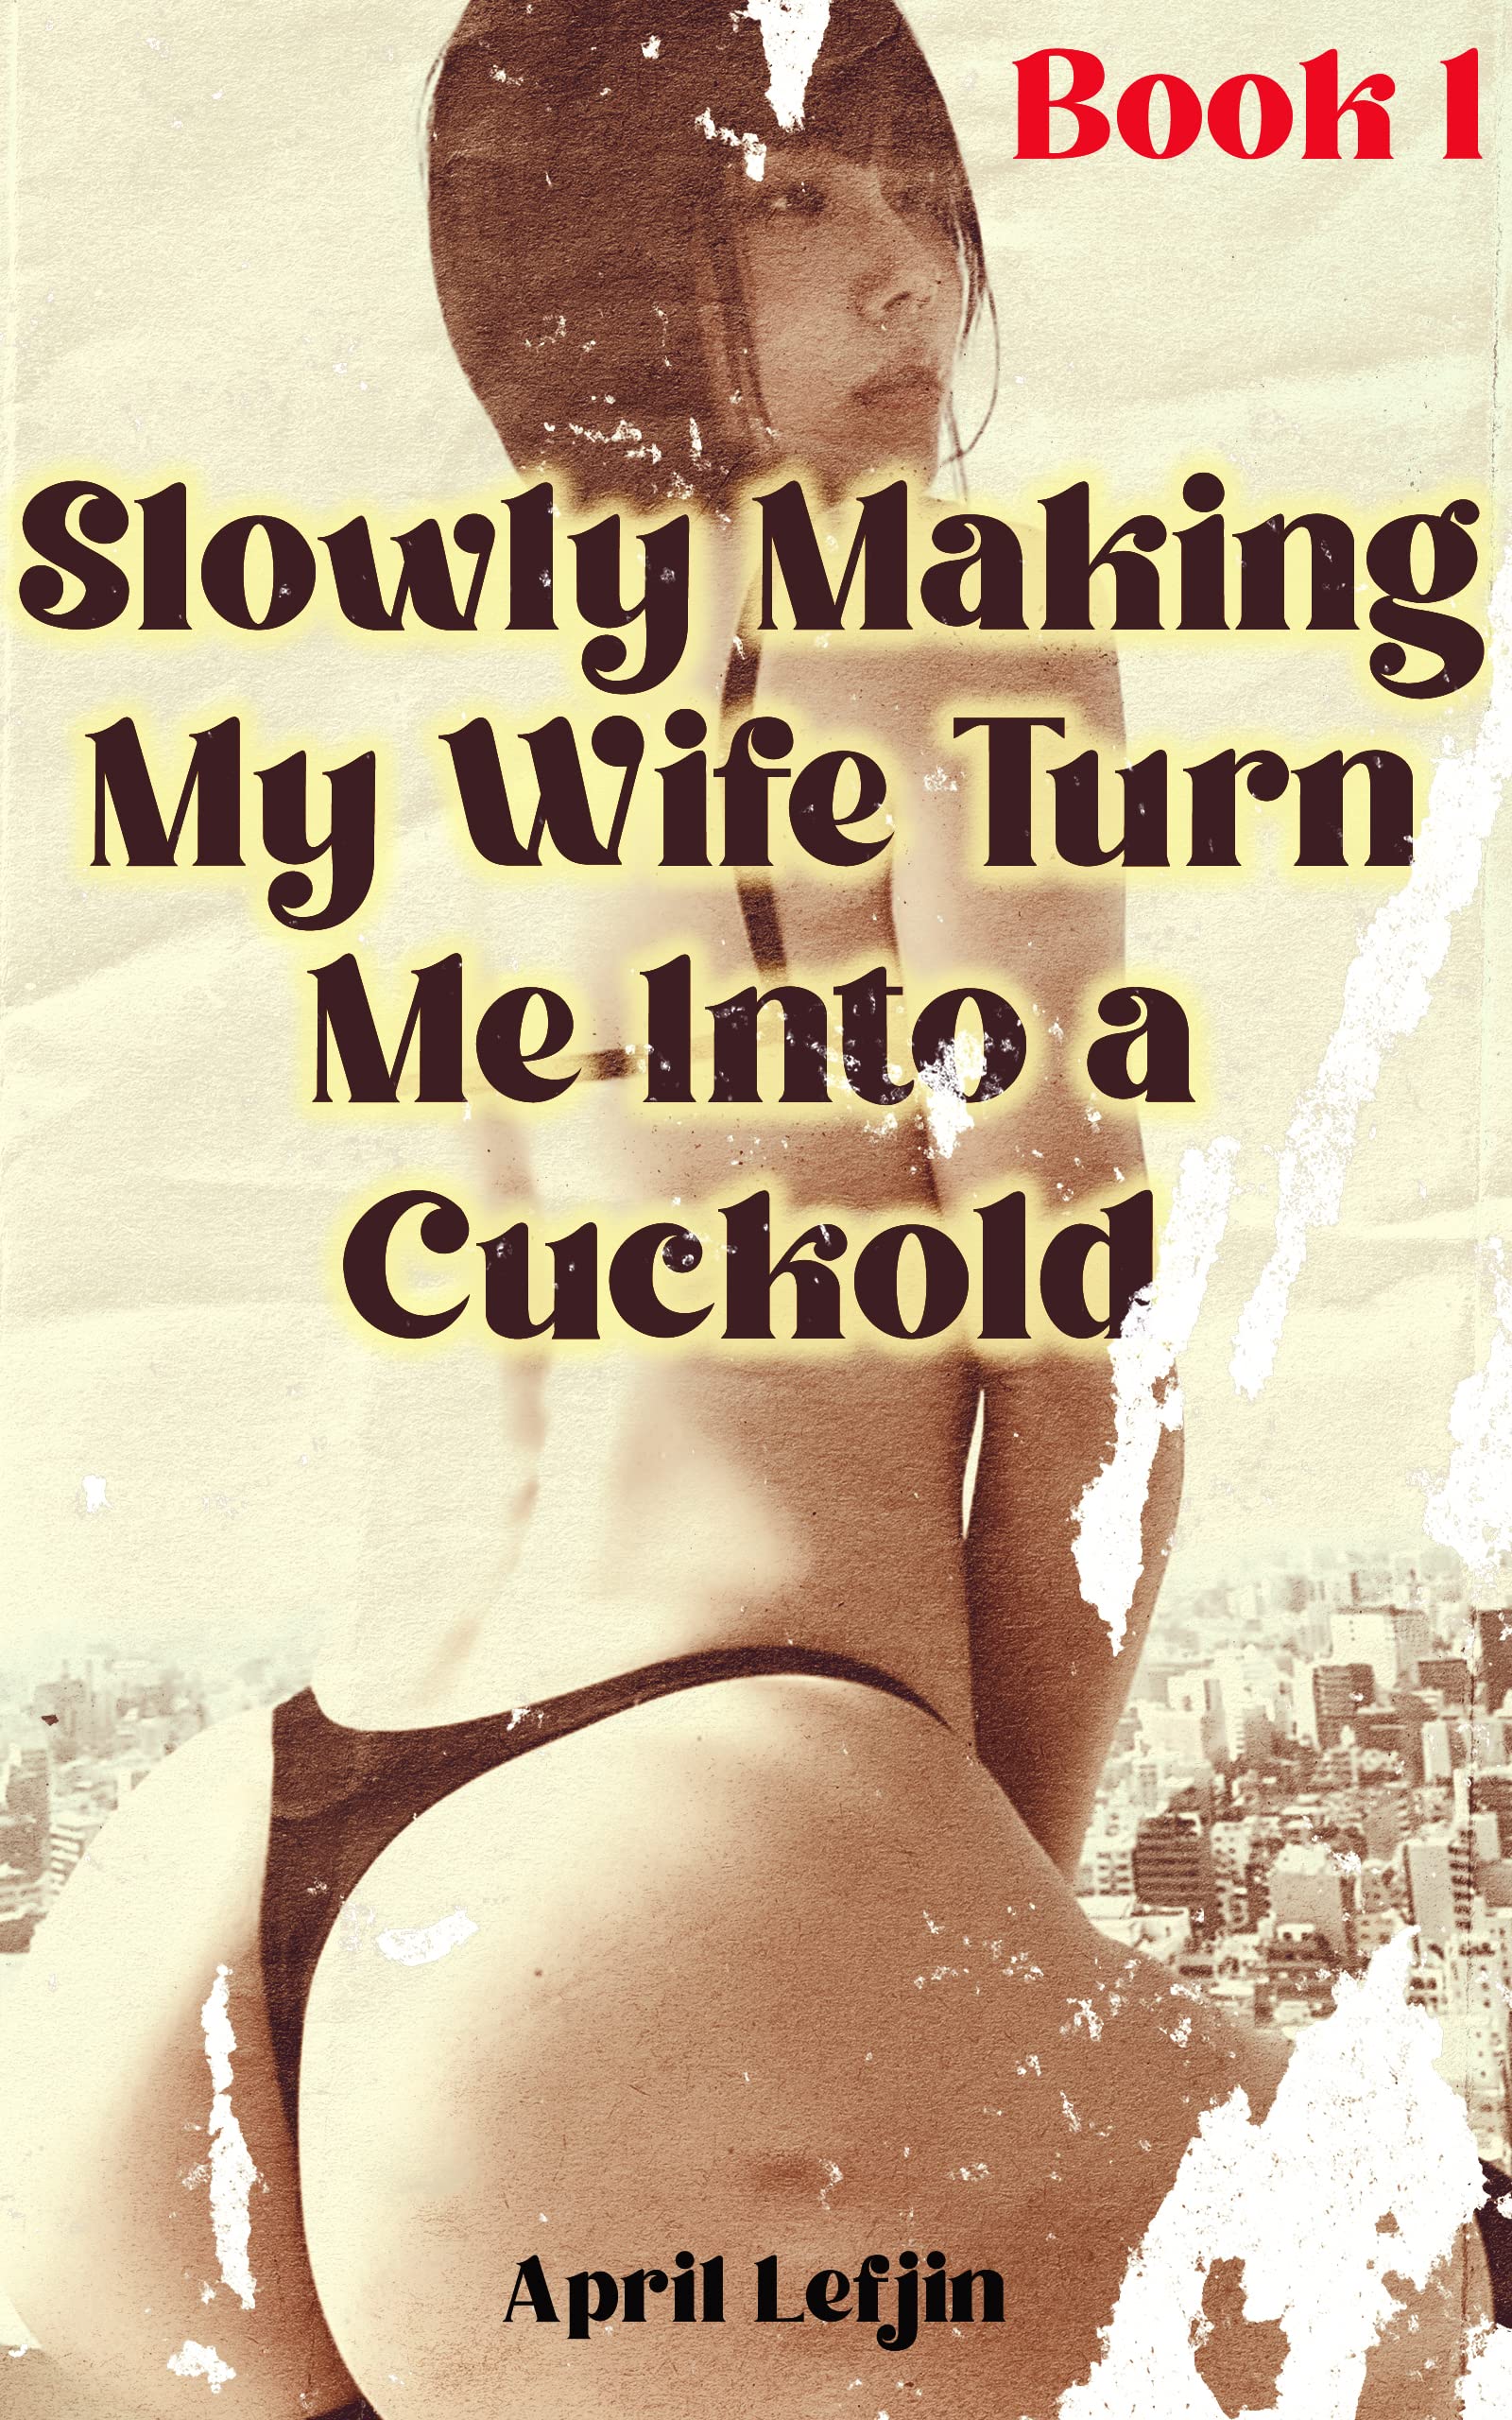 cecilia rafael recommends My Wife Made Me A Cuckold